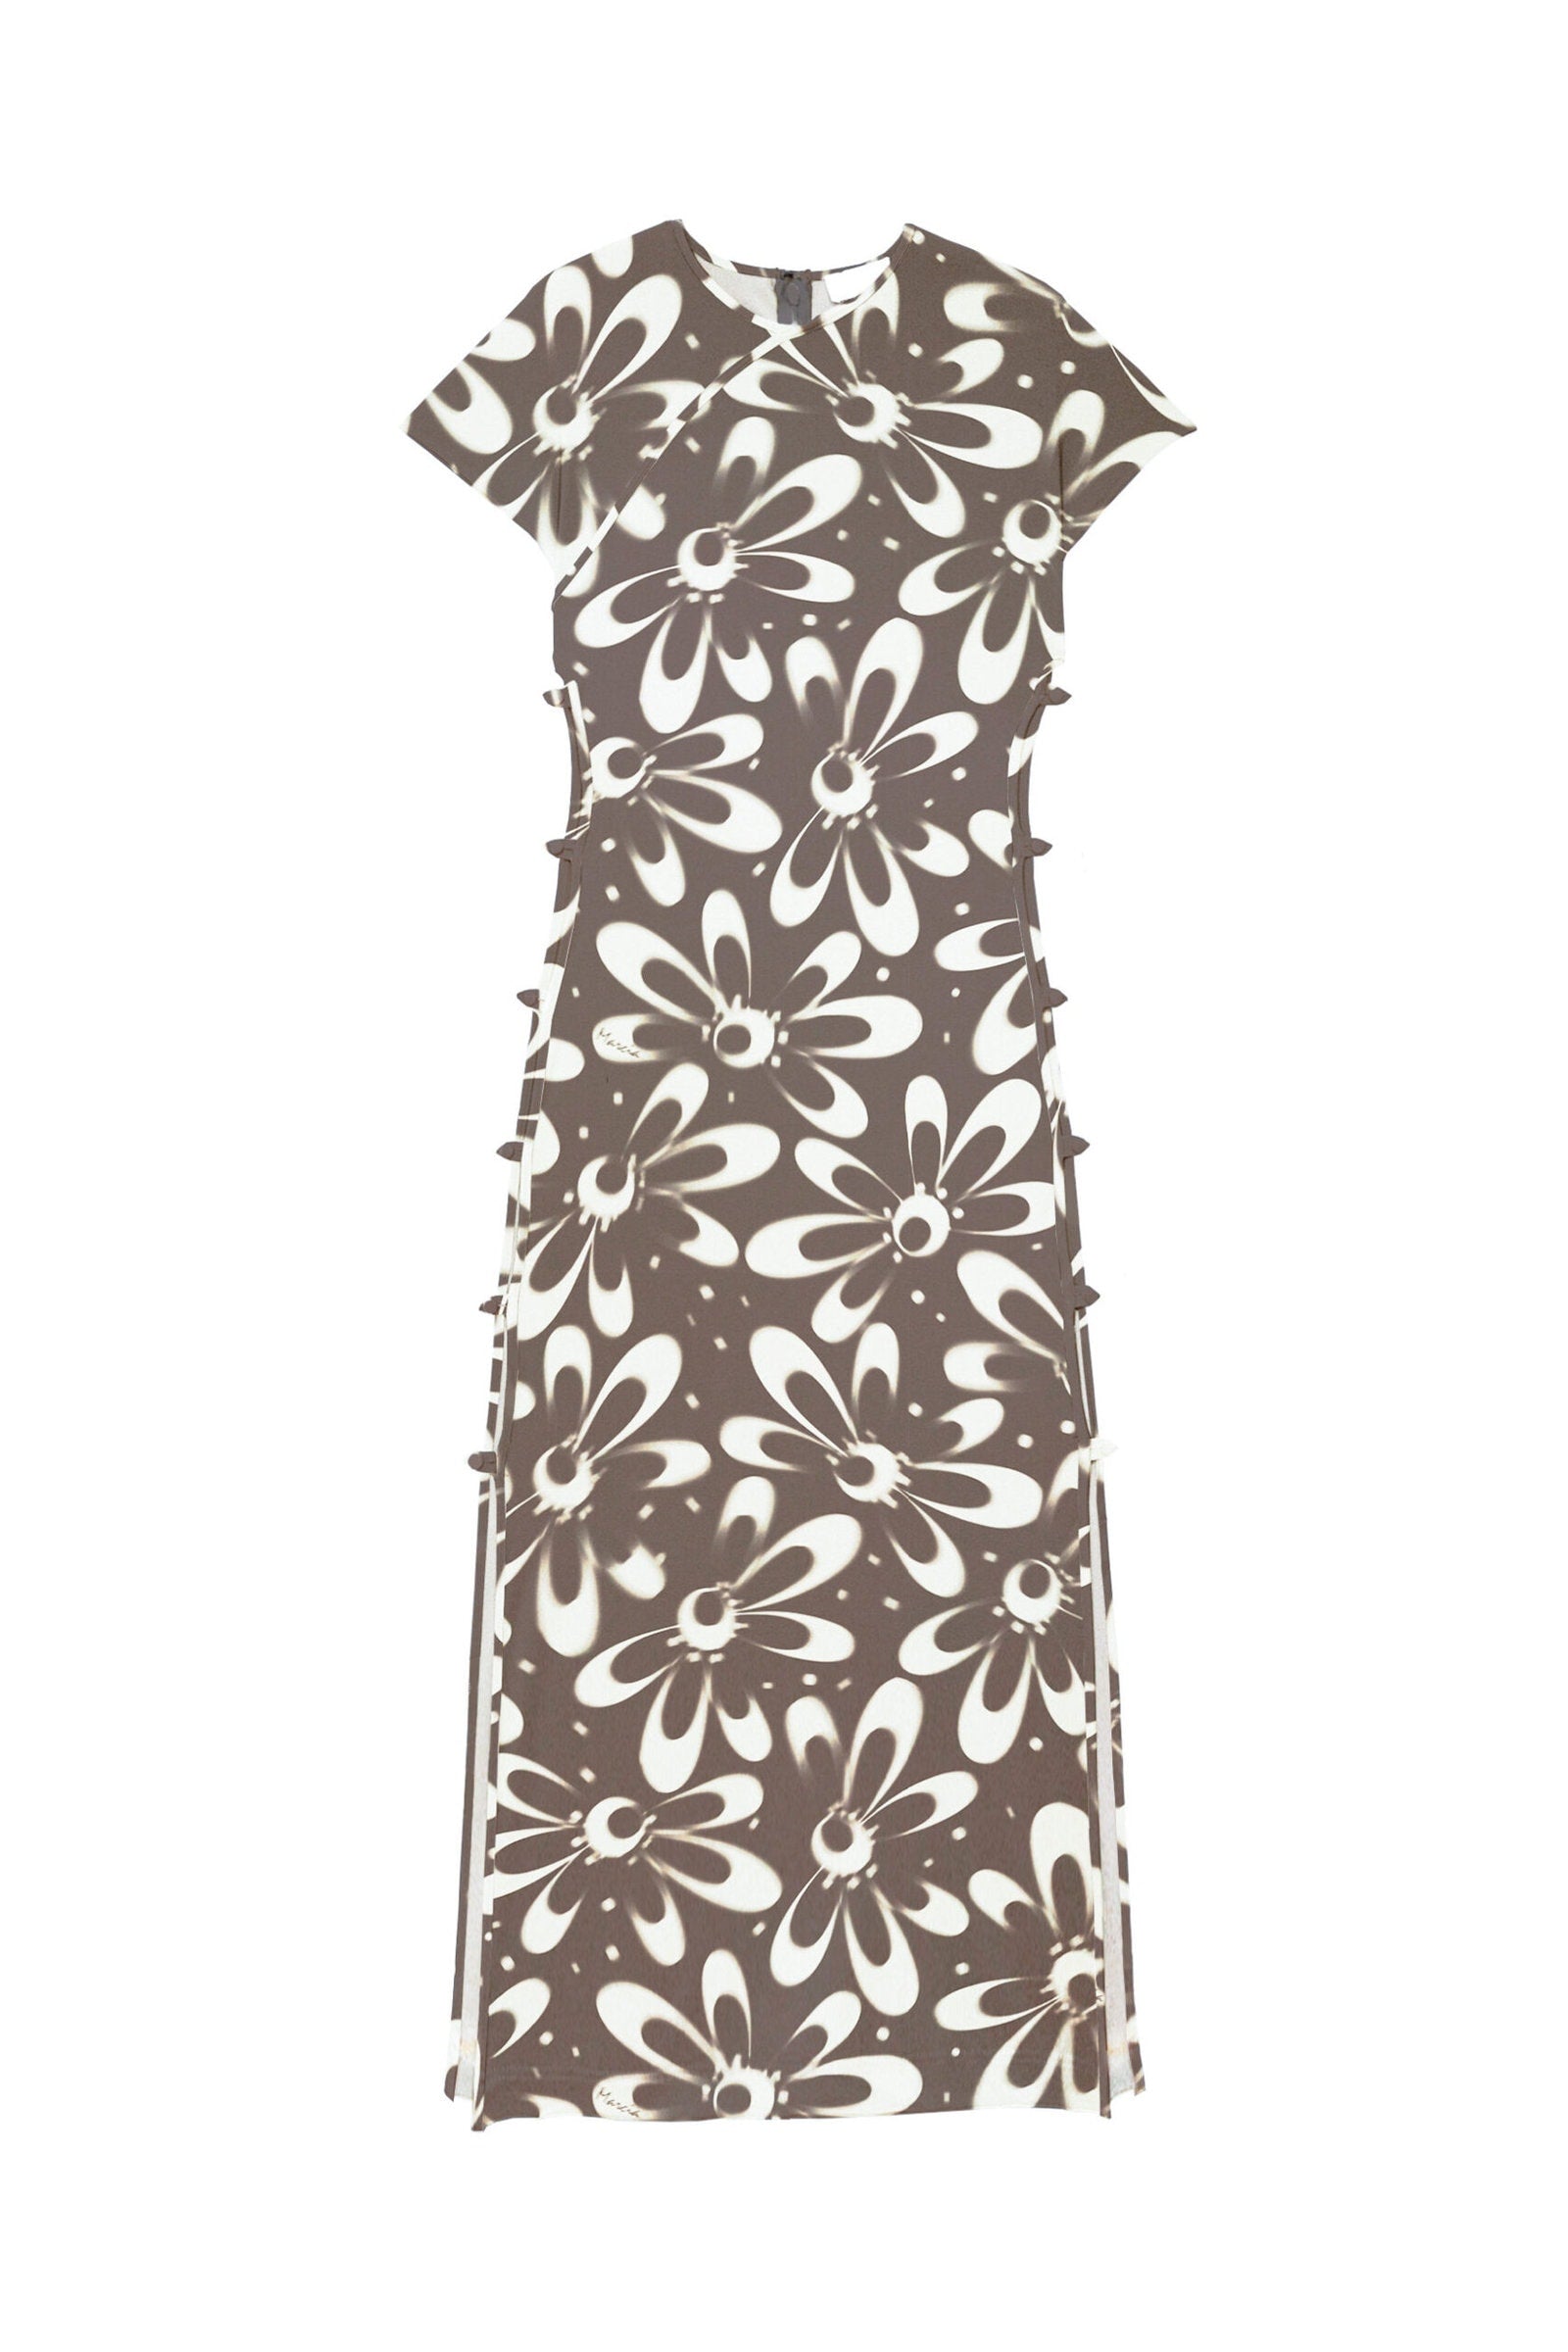 TCHIKIBOUM LONG DRESS in floral cappuccino